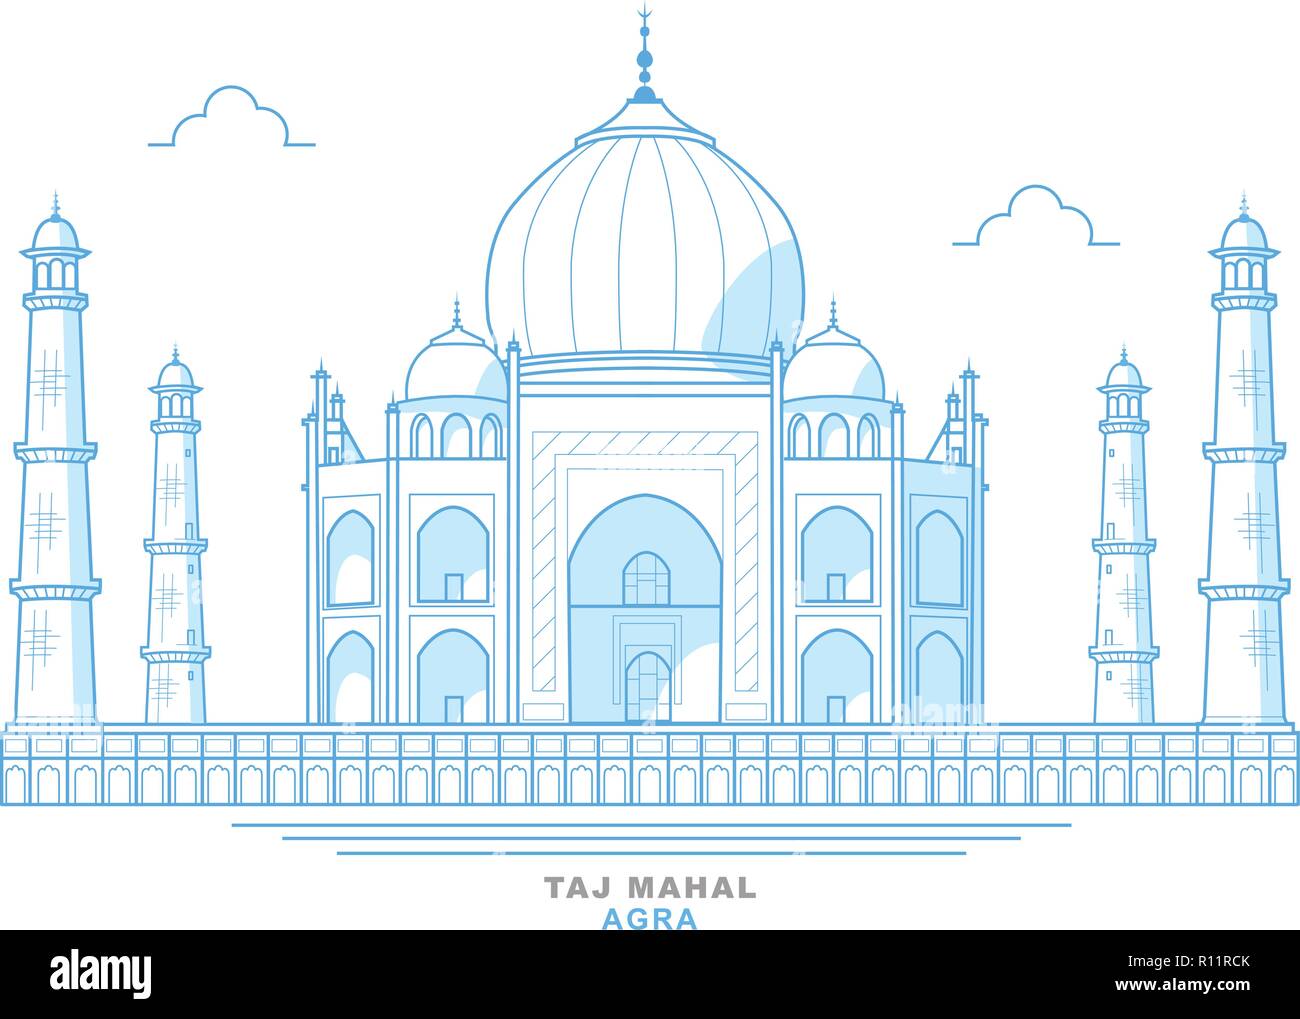 How To Draw A Taj Mahal Step by Step - [14 Easy Phase] & [Video]